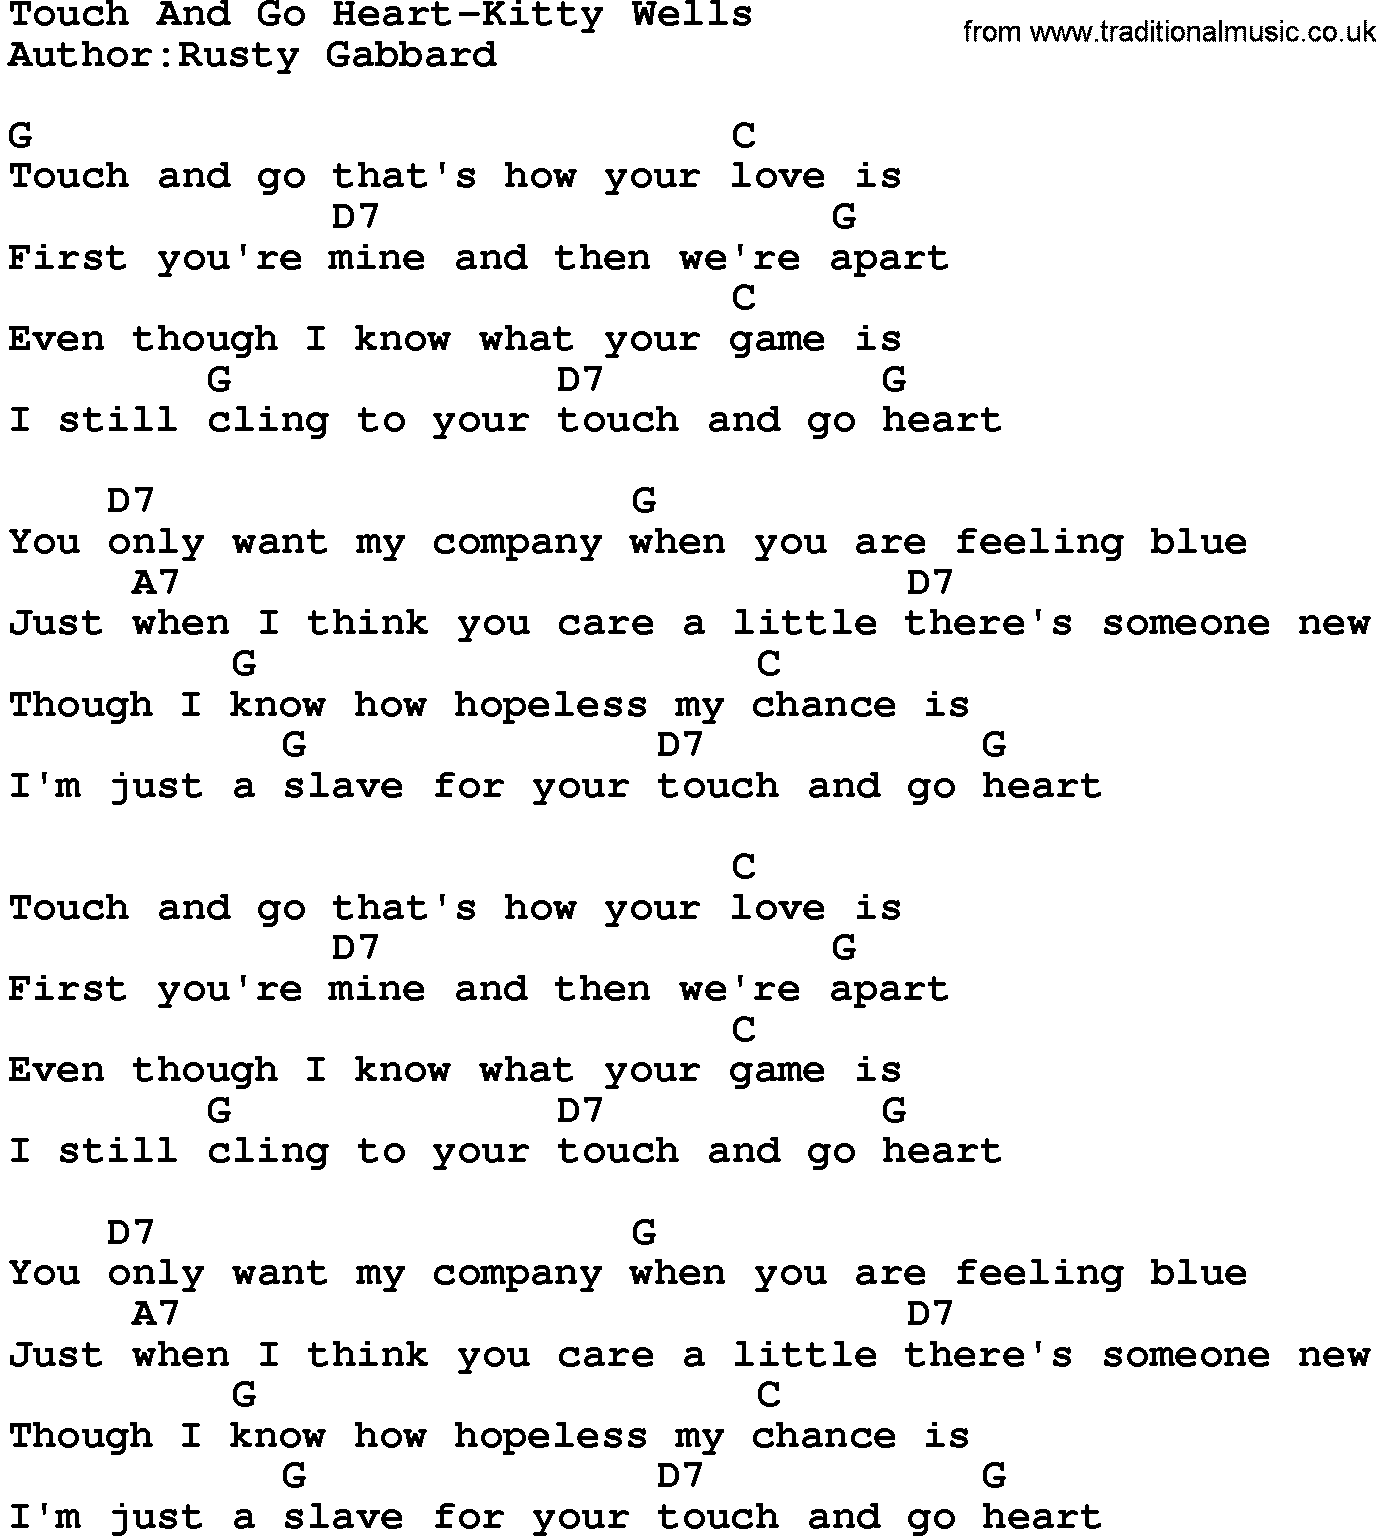 Country music song: Touch And Go Heart-Kitty Wells lyrics and chords